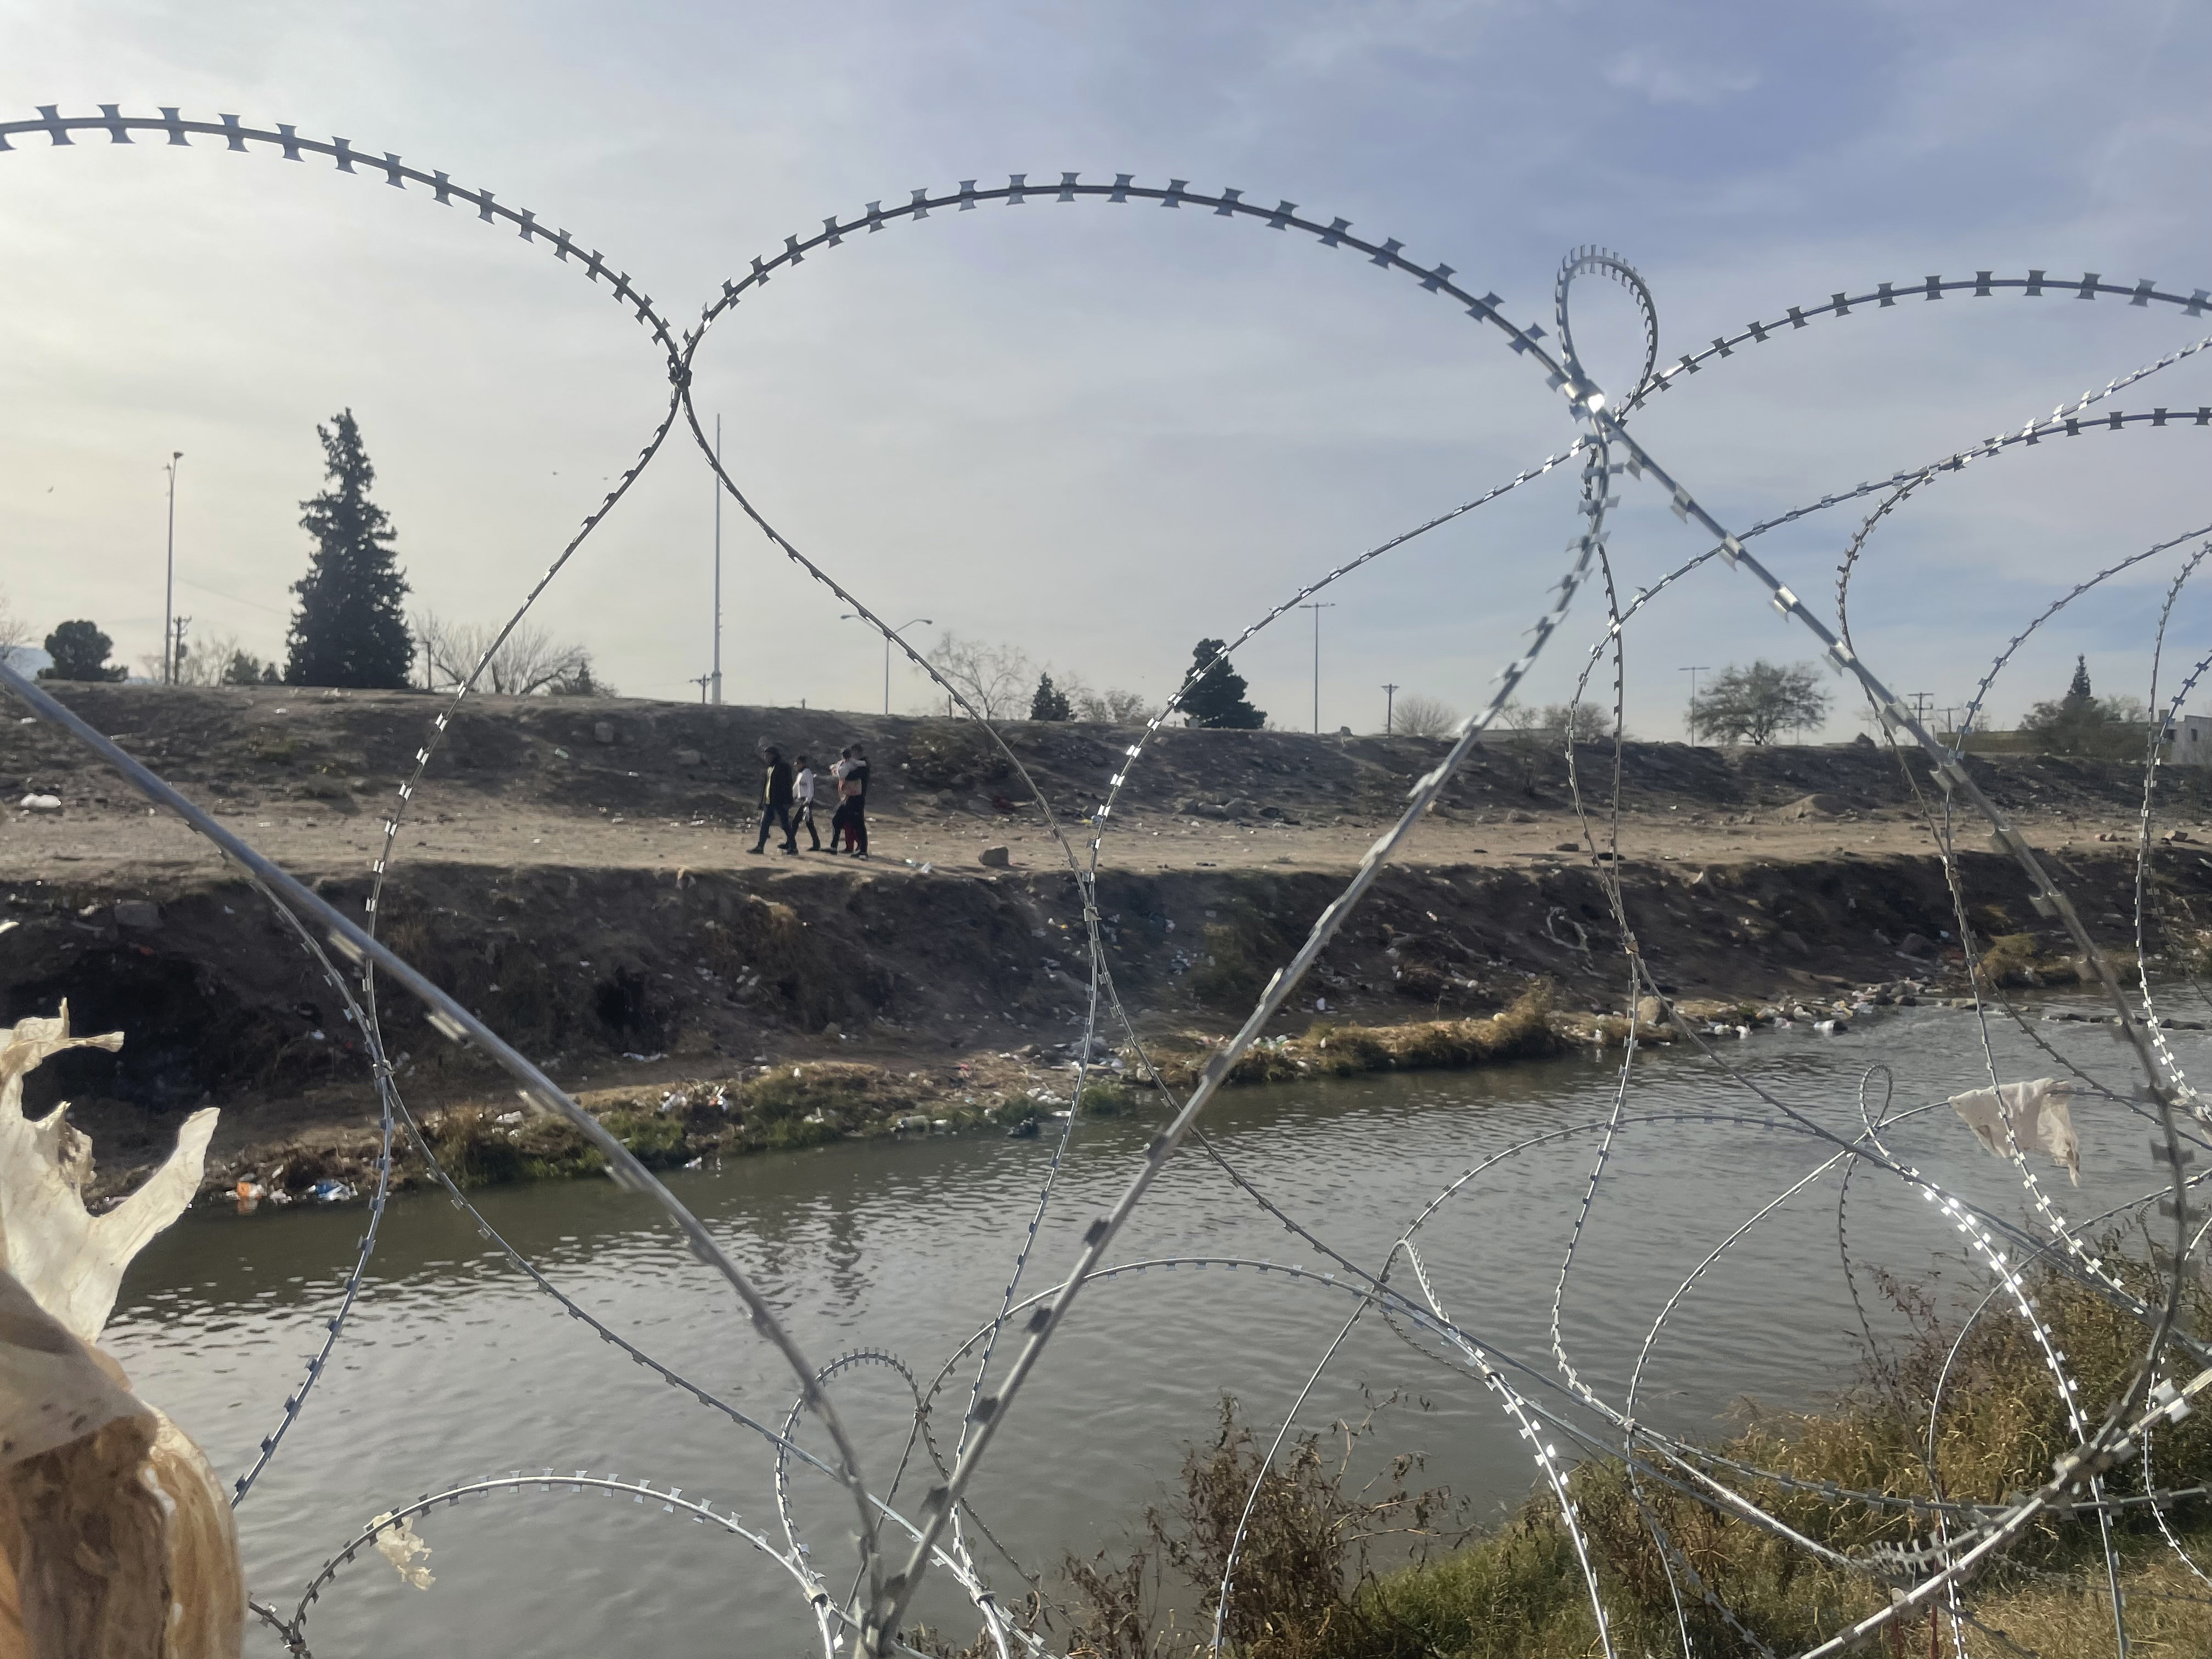 A family is seen on the Mexican side of the Rio Grande River through the concertina wire placed earlier in the day by Texas National Guard troops at site of the recent mass migrant crossings in El Paso, Texas, Tuesday, Dec. 20, 2022. (AP Photo/Giovanna Dell'Orto)